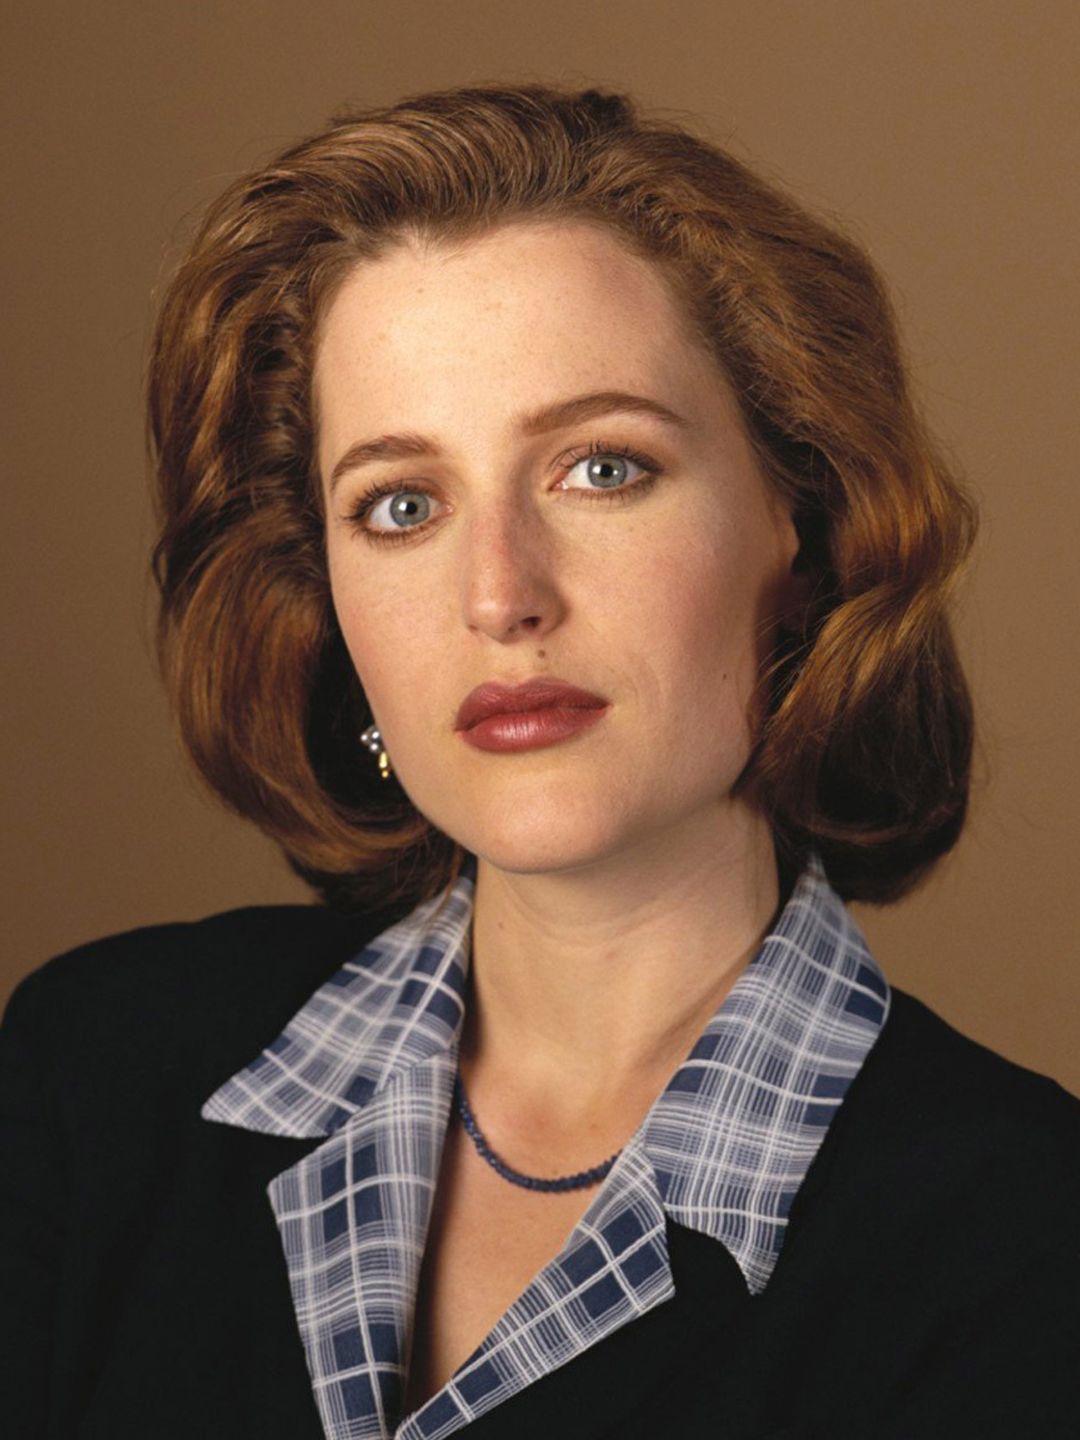 Gillian Anderson story of success